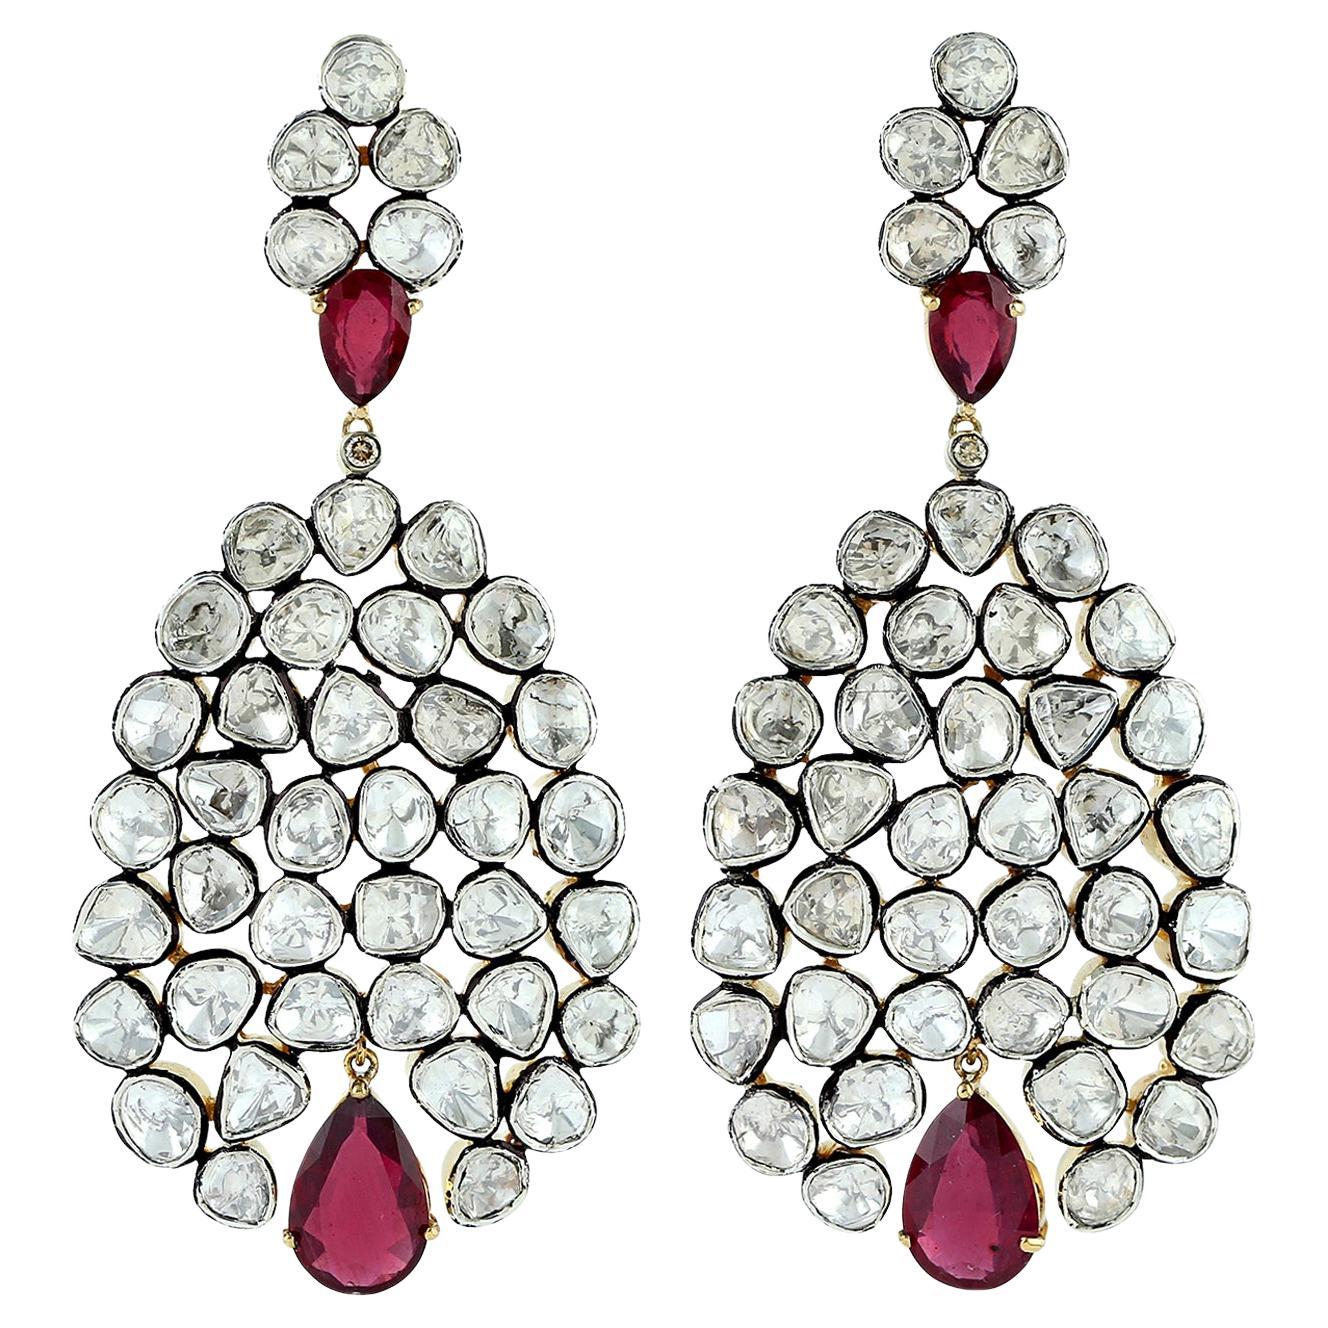 17.48ct Rosecut Diamonds Dangle Earrings With Ruby In 18k yellow Gold & Silver